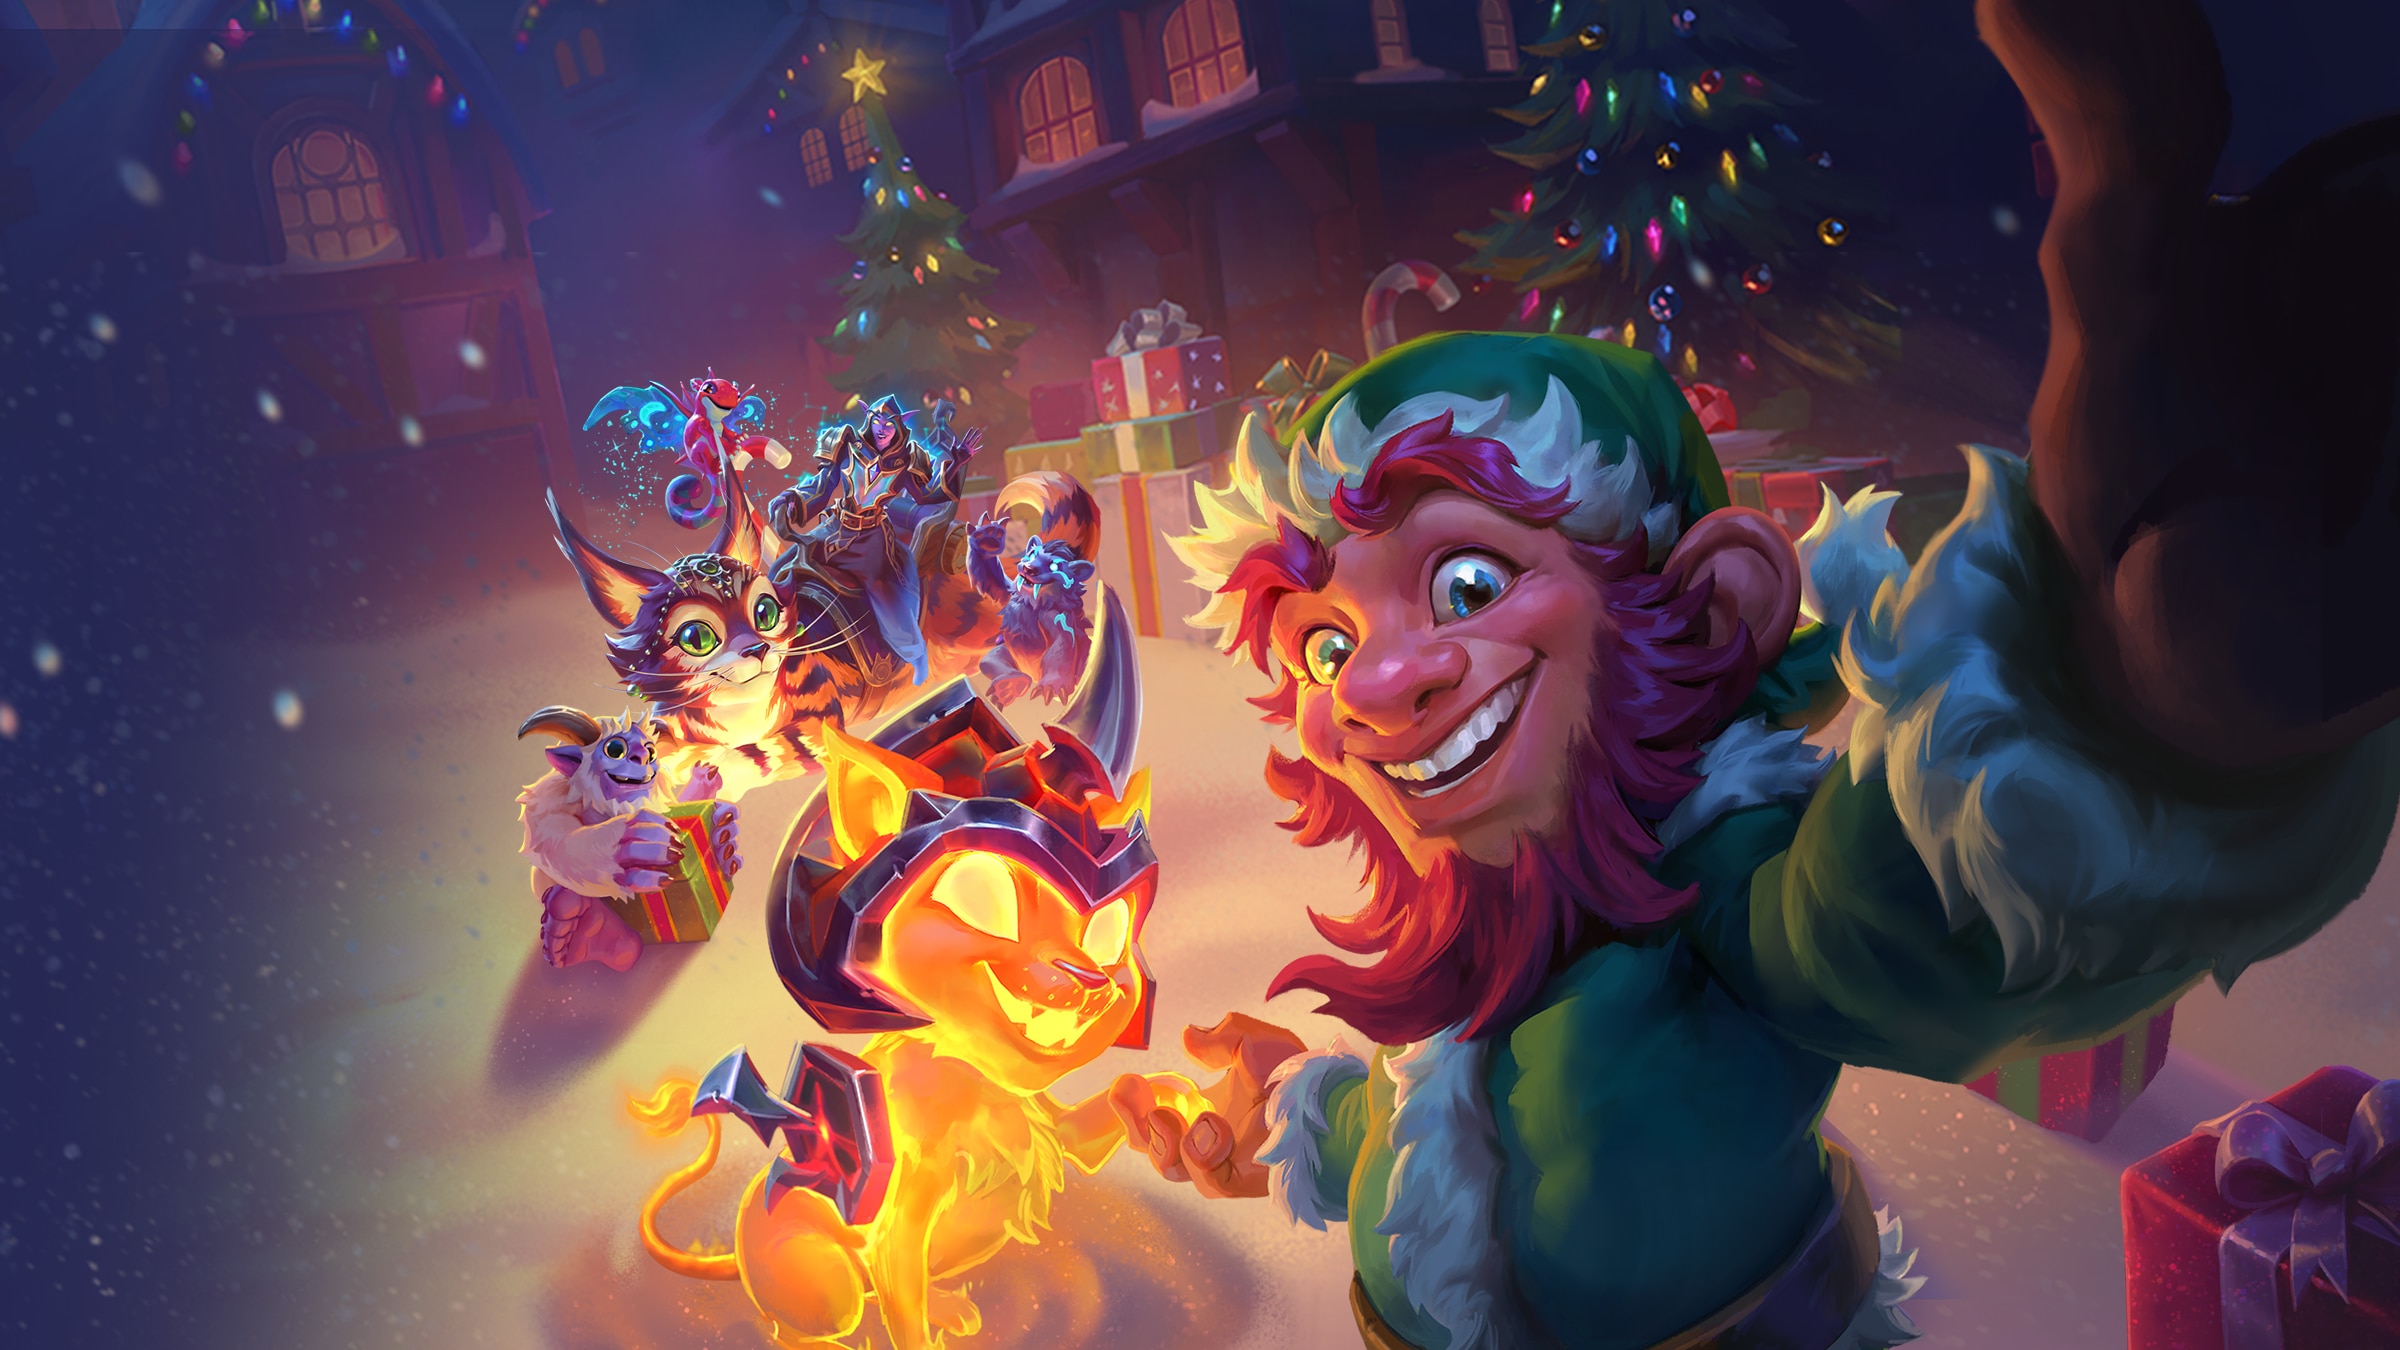 Get Delightful Deals on Pets, Mounts, and More During Our Holiday Sale!